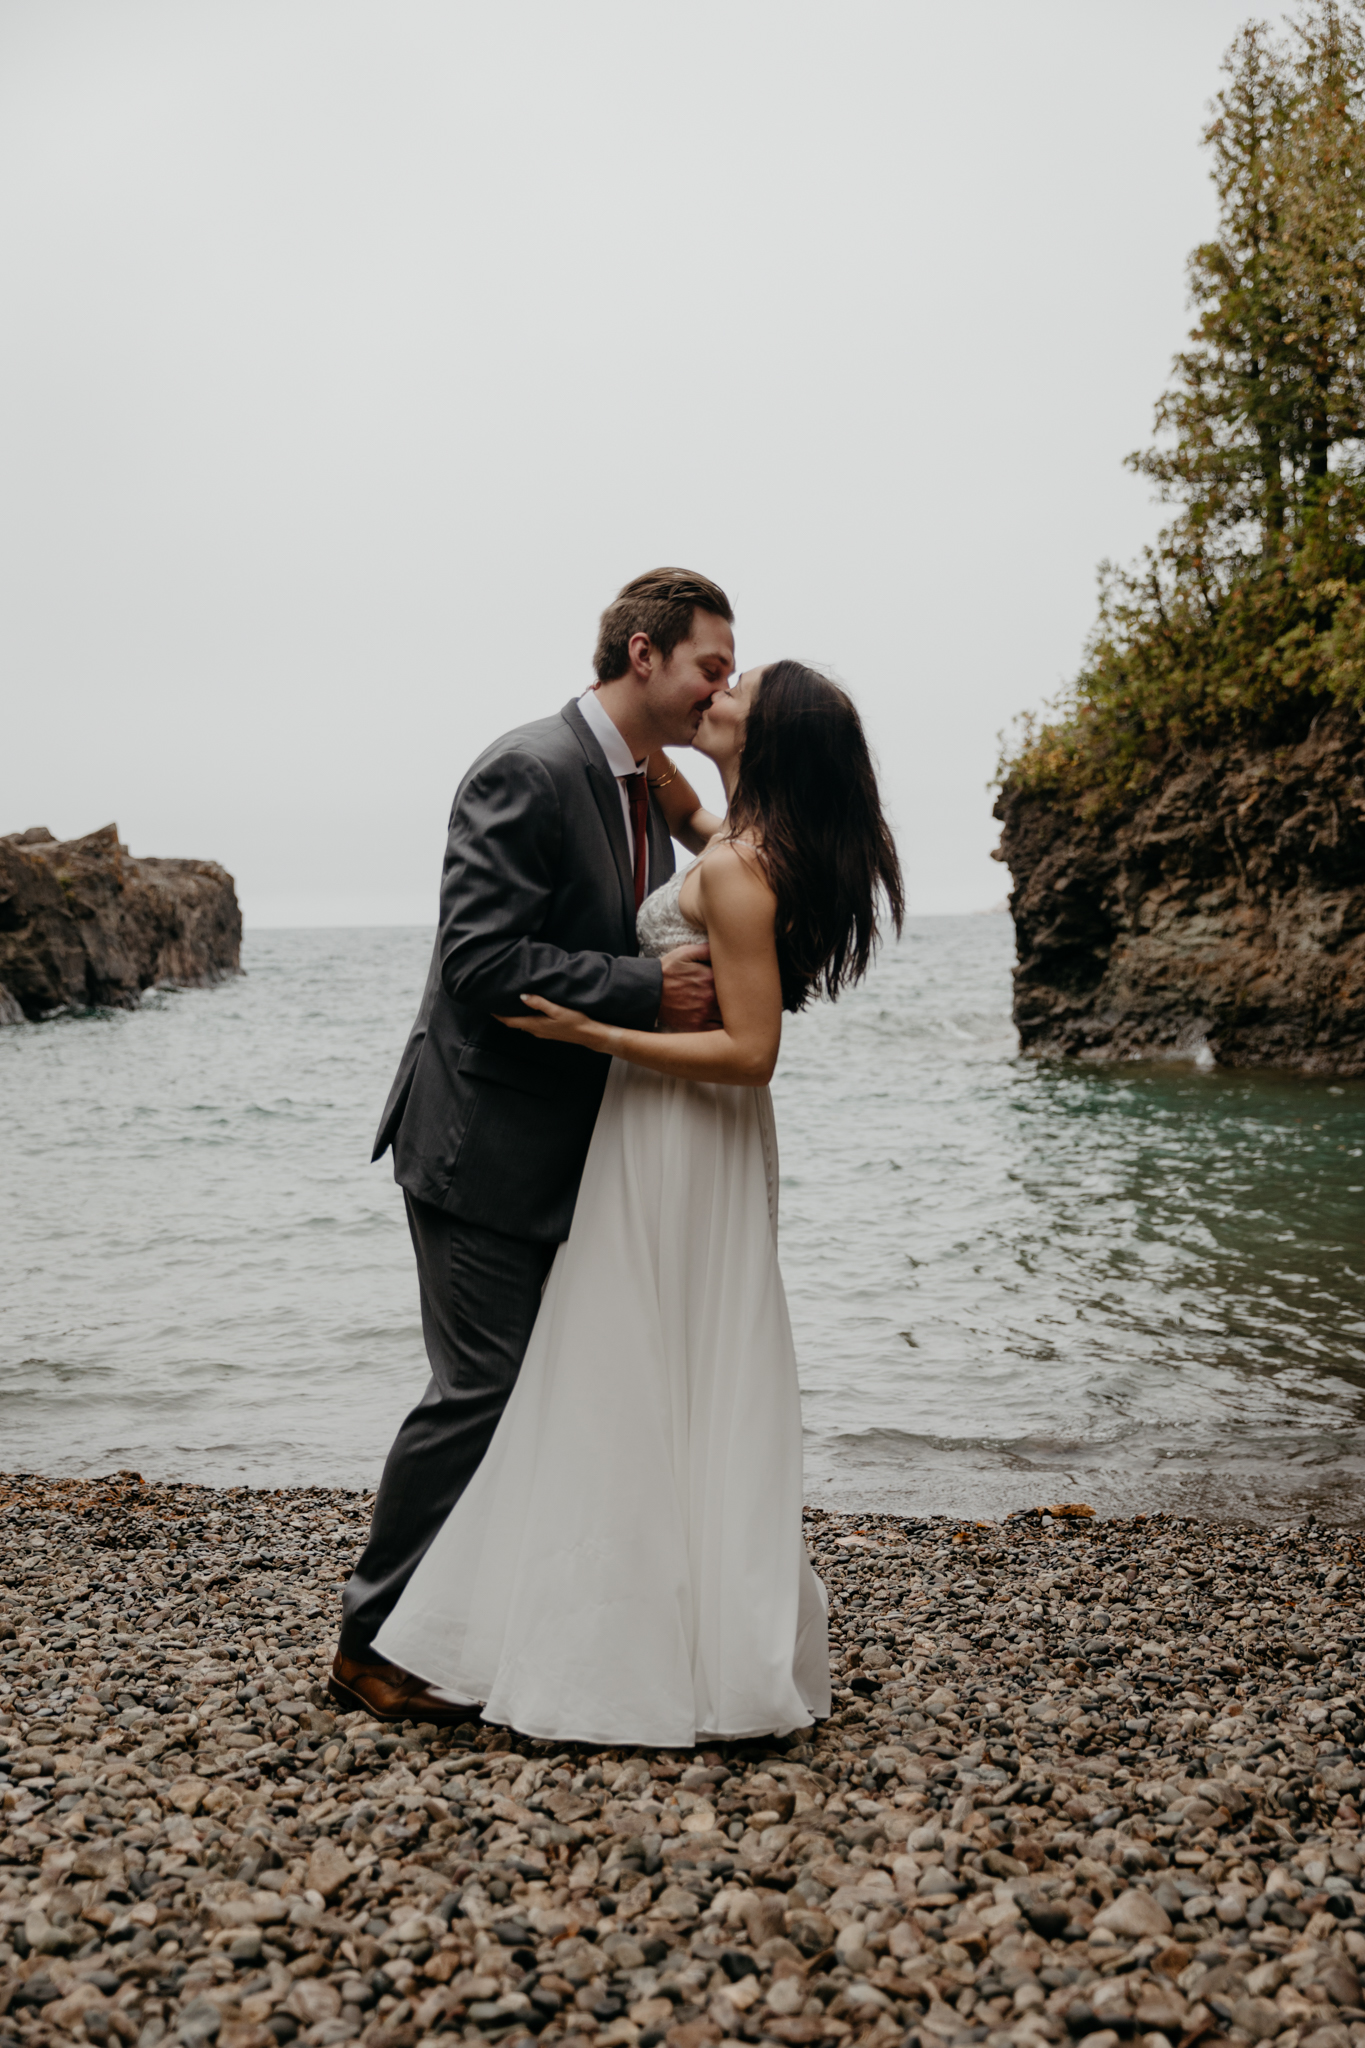 The dreamiest moody elopement ceremony at Presque Isle Park, Michigan